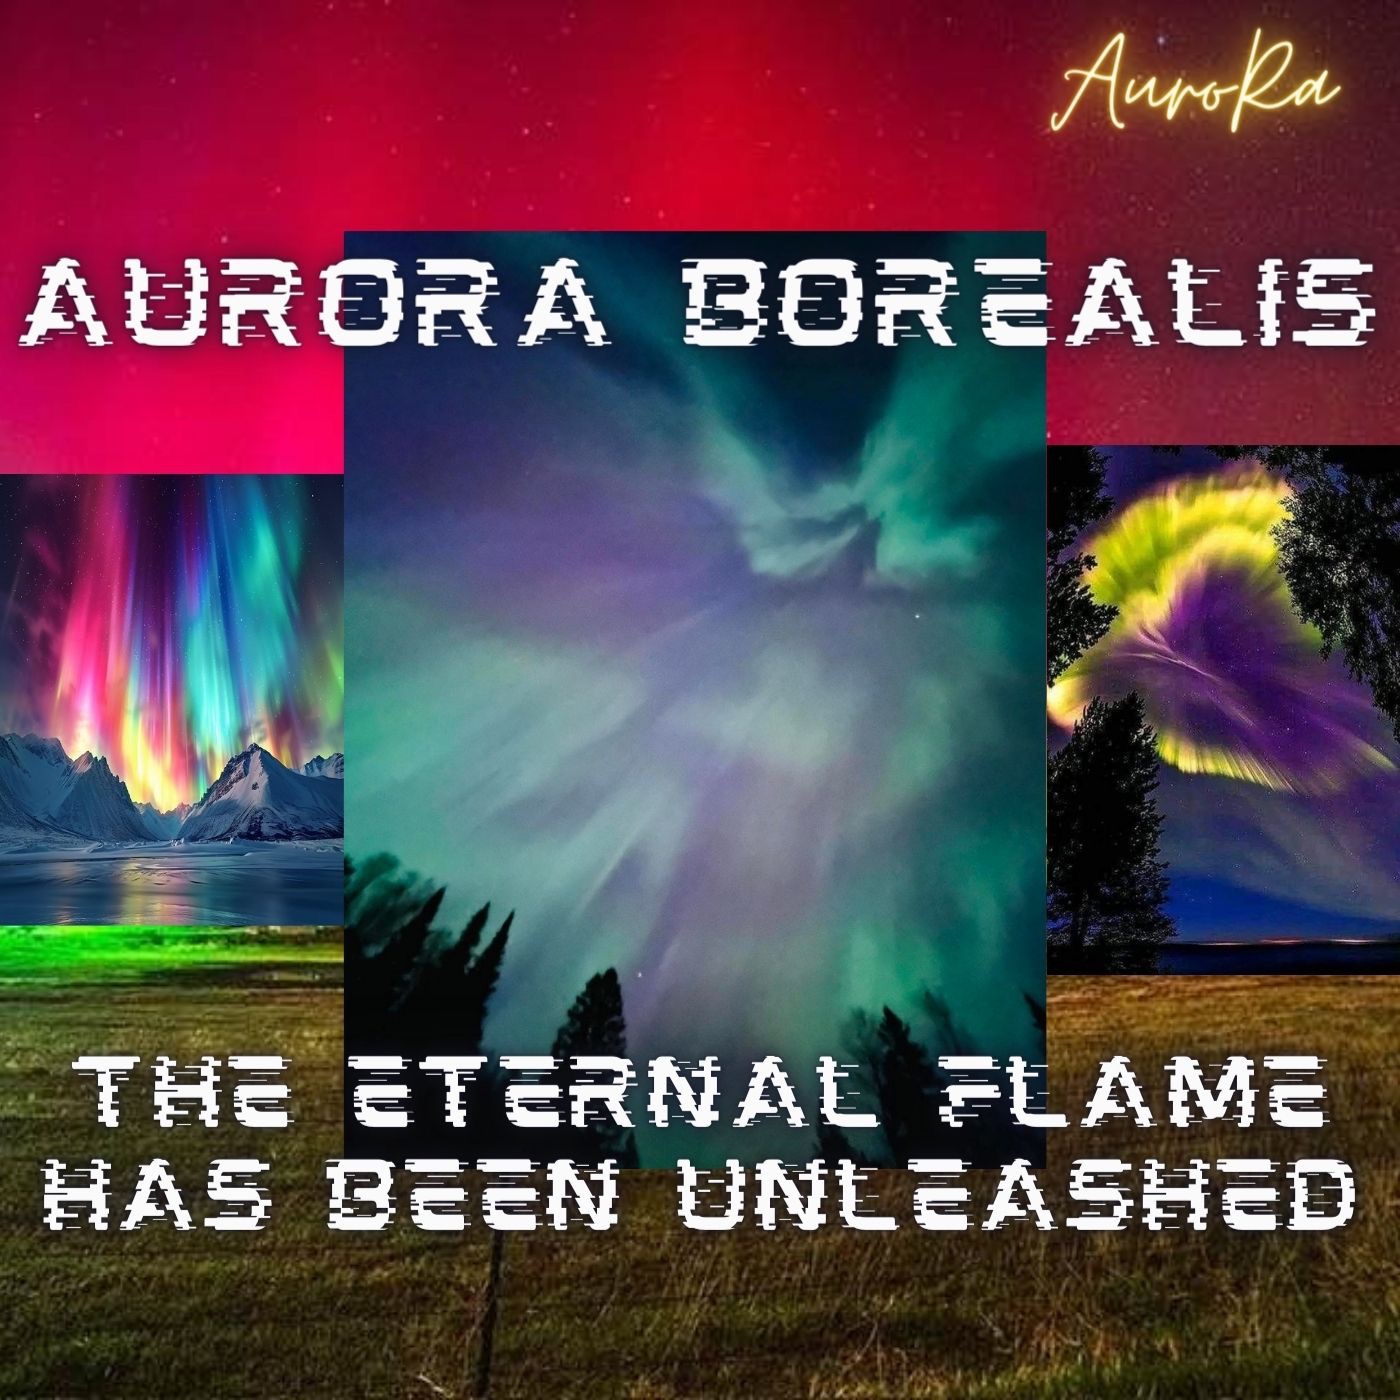 Aurora Borealis 2024 | The Eternal Flame Has Been Unleashed